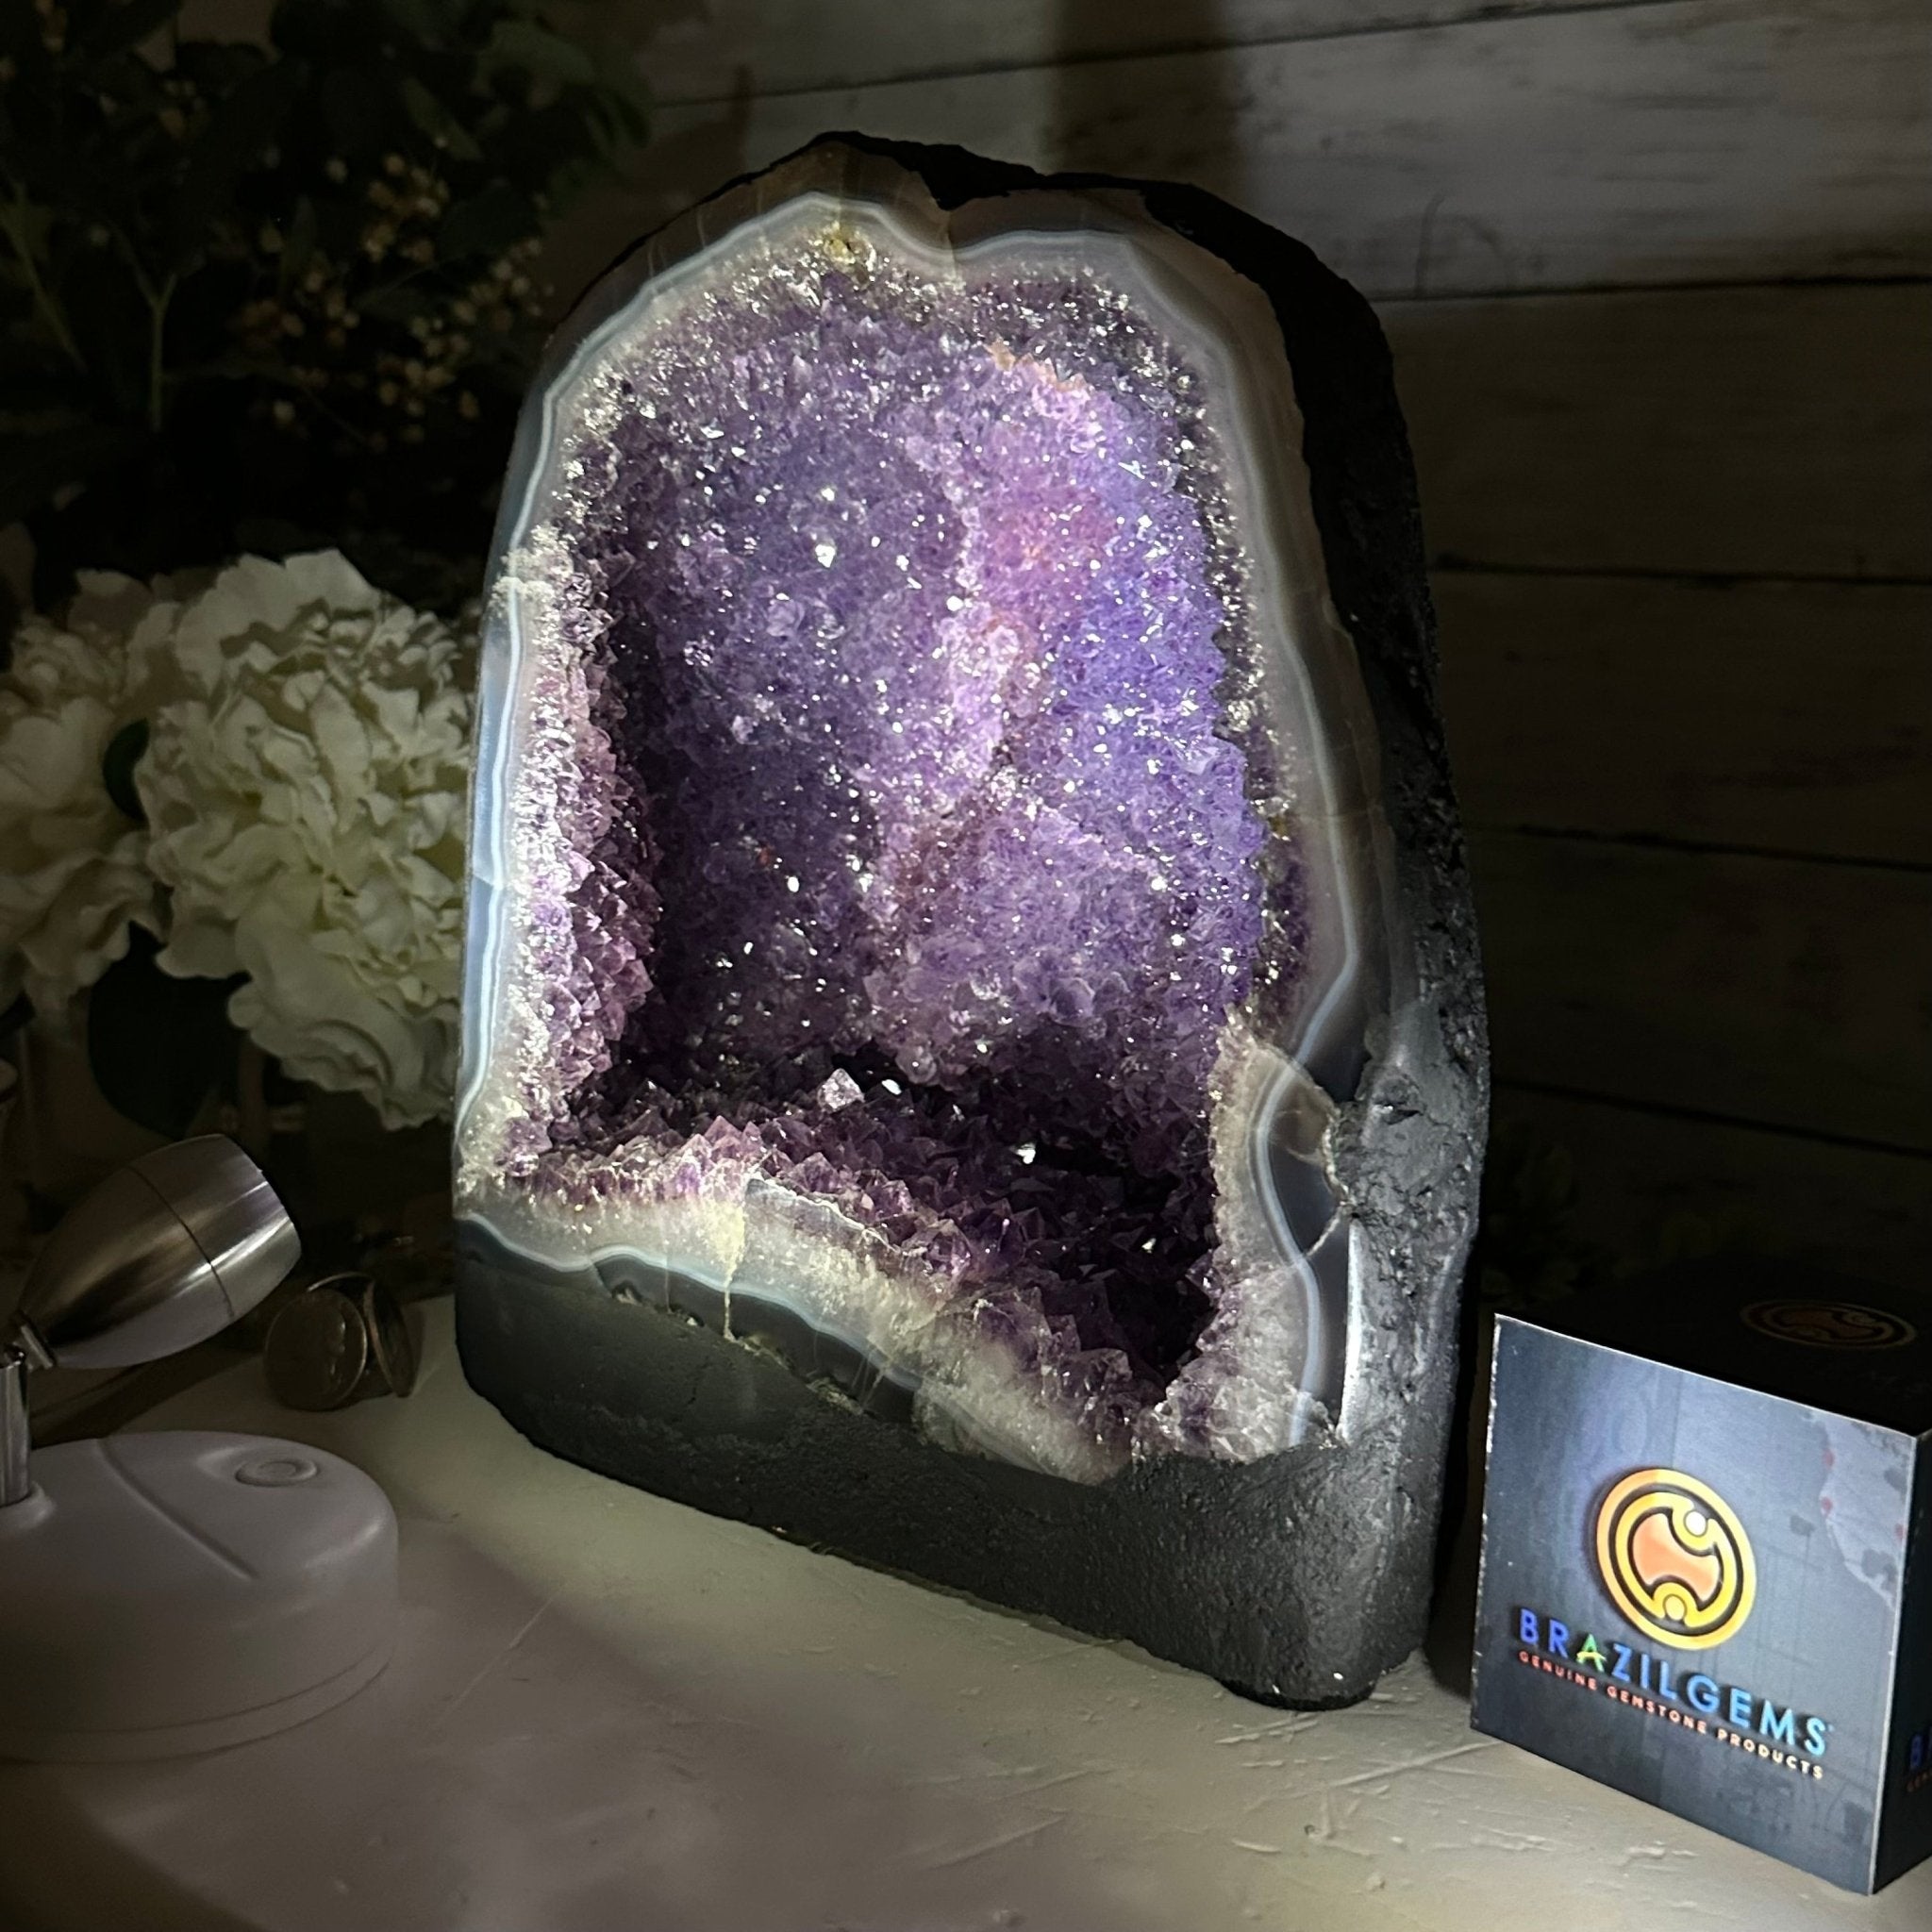 Quality Brazilian Amethyst Cathedral, 17.9 lbs & 9.2" Tall #5601 - 1381 - Brazil GemsBrazil GemsQuality Brazilian Amethyst Cathedral, 17.9 lbs & 9.2" Tall #5601 - 1381Cathedrals5601 - 1381